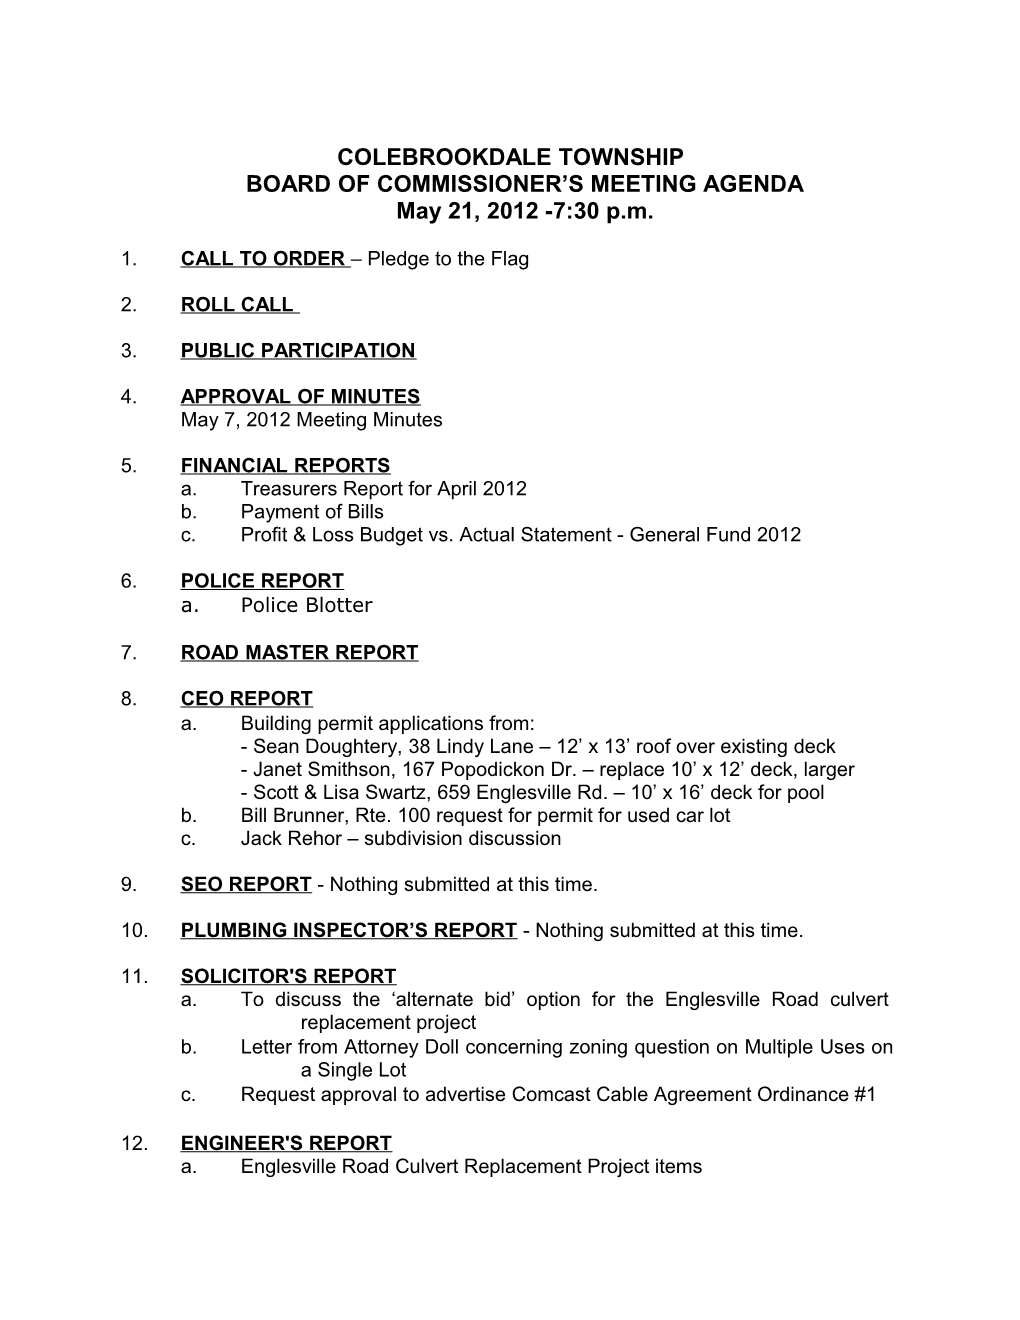 Board of Commissionersmay 21, 2012Page1